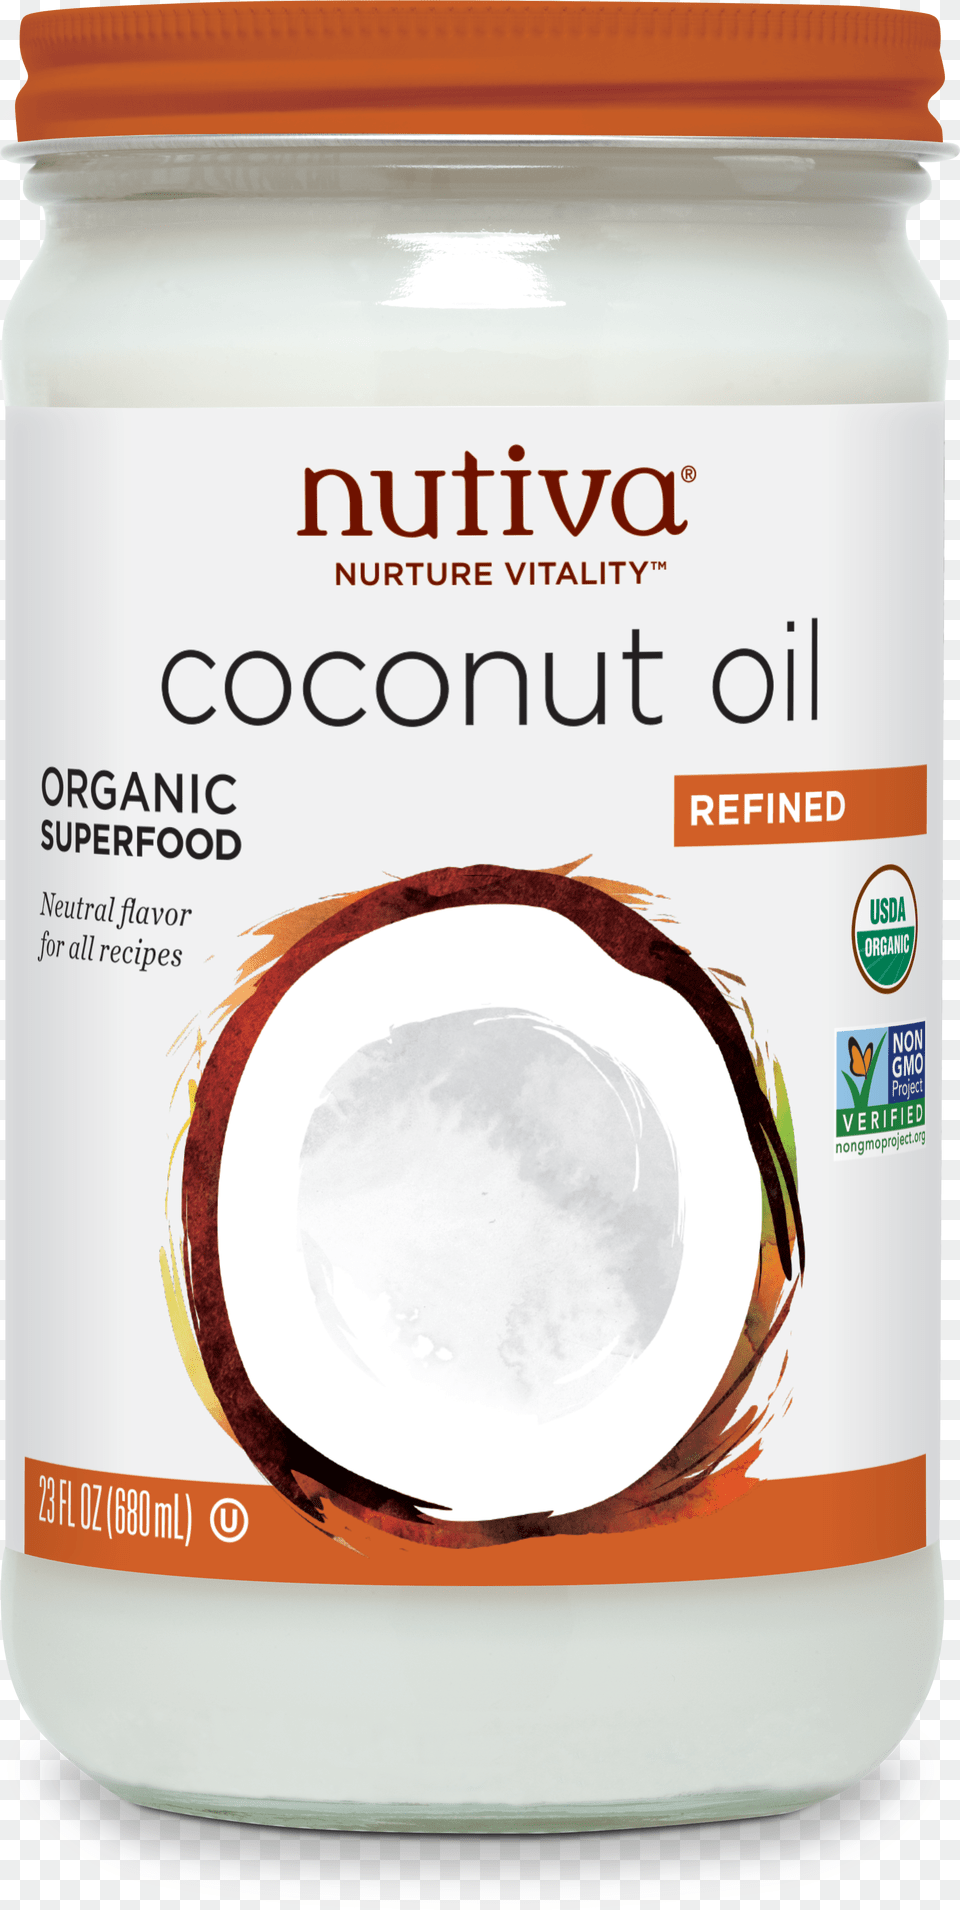 Baking With Organic Coconut Oil Nutiva Organic Coconut Oil Free Png Download